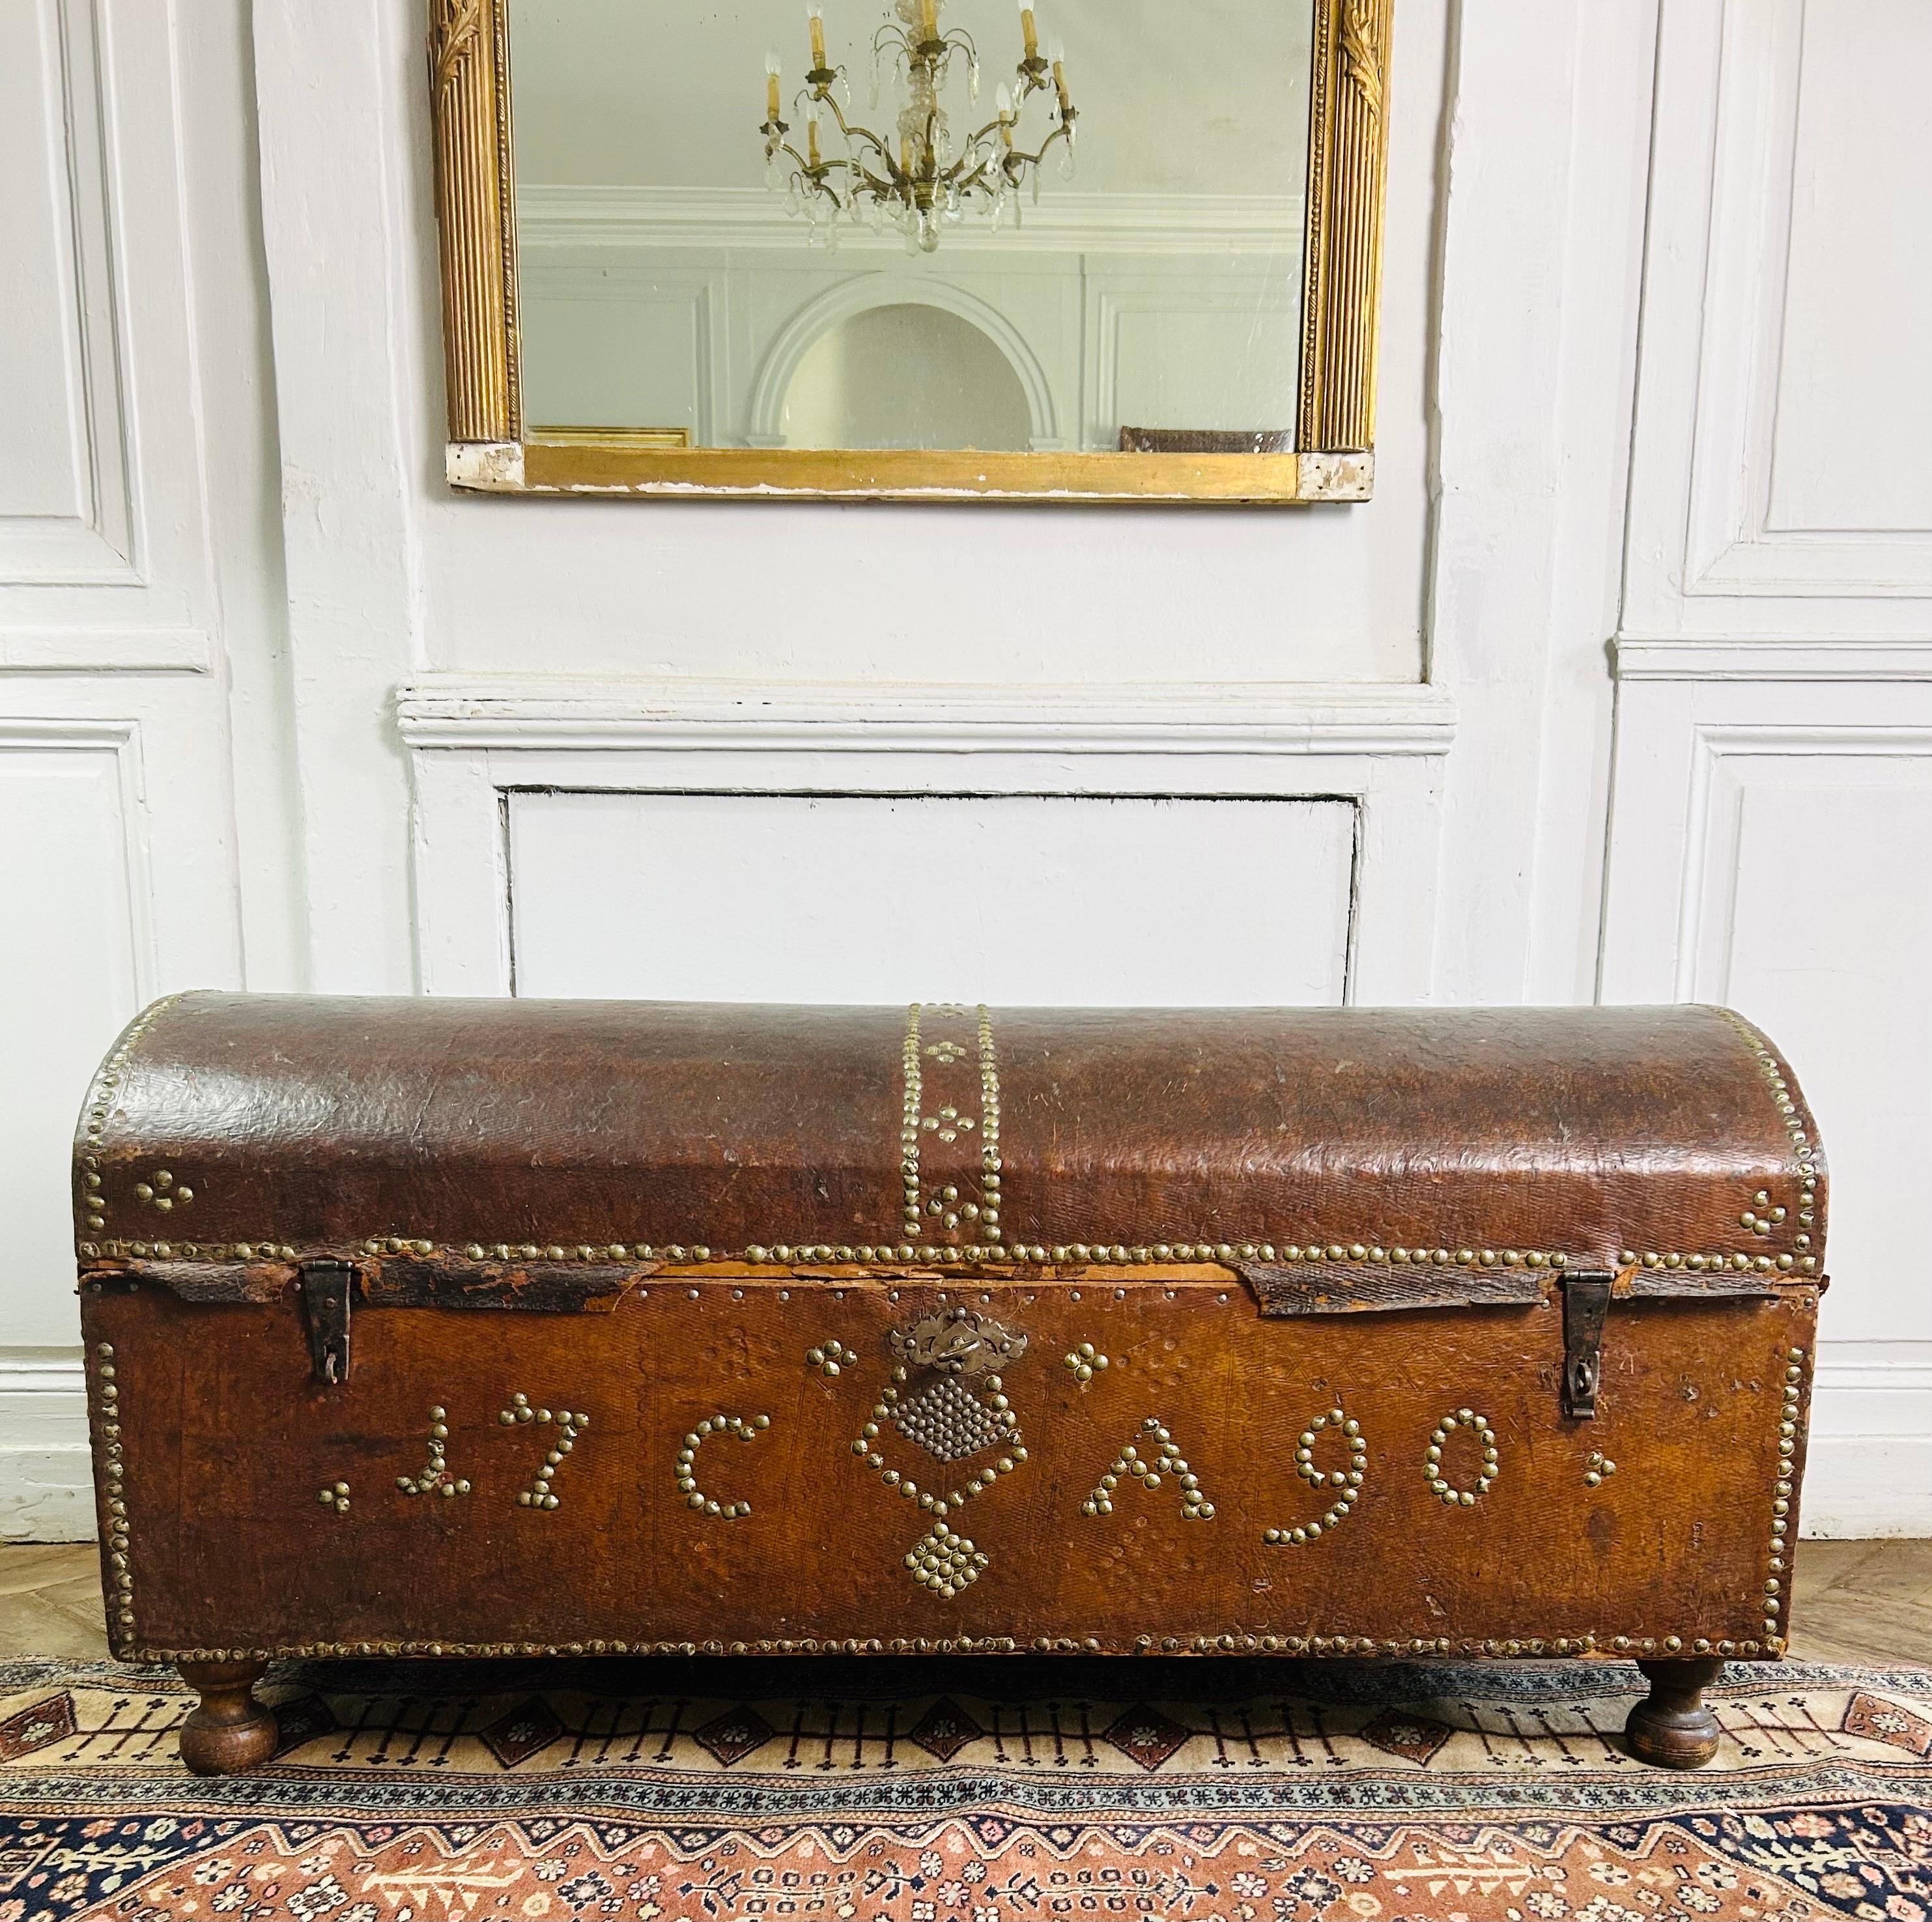 Very rare large blanket chest, Italian trunk from the 18th century in wood covered in leather. On feet. Louis XV period.
The core of the chest is made of wood covered in leather with a brass studded decoration.
The date is thus studded: 1790. (17 C